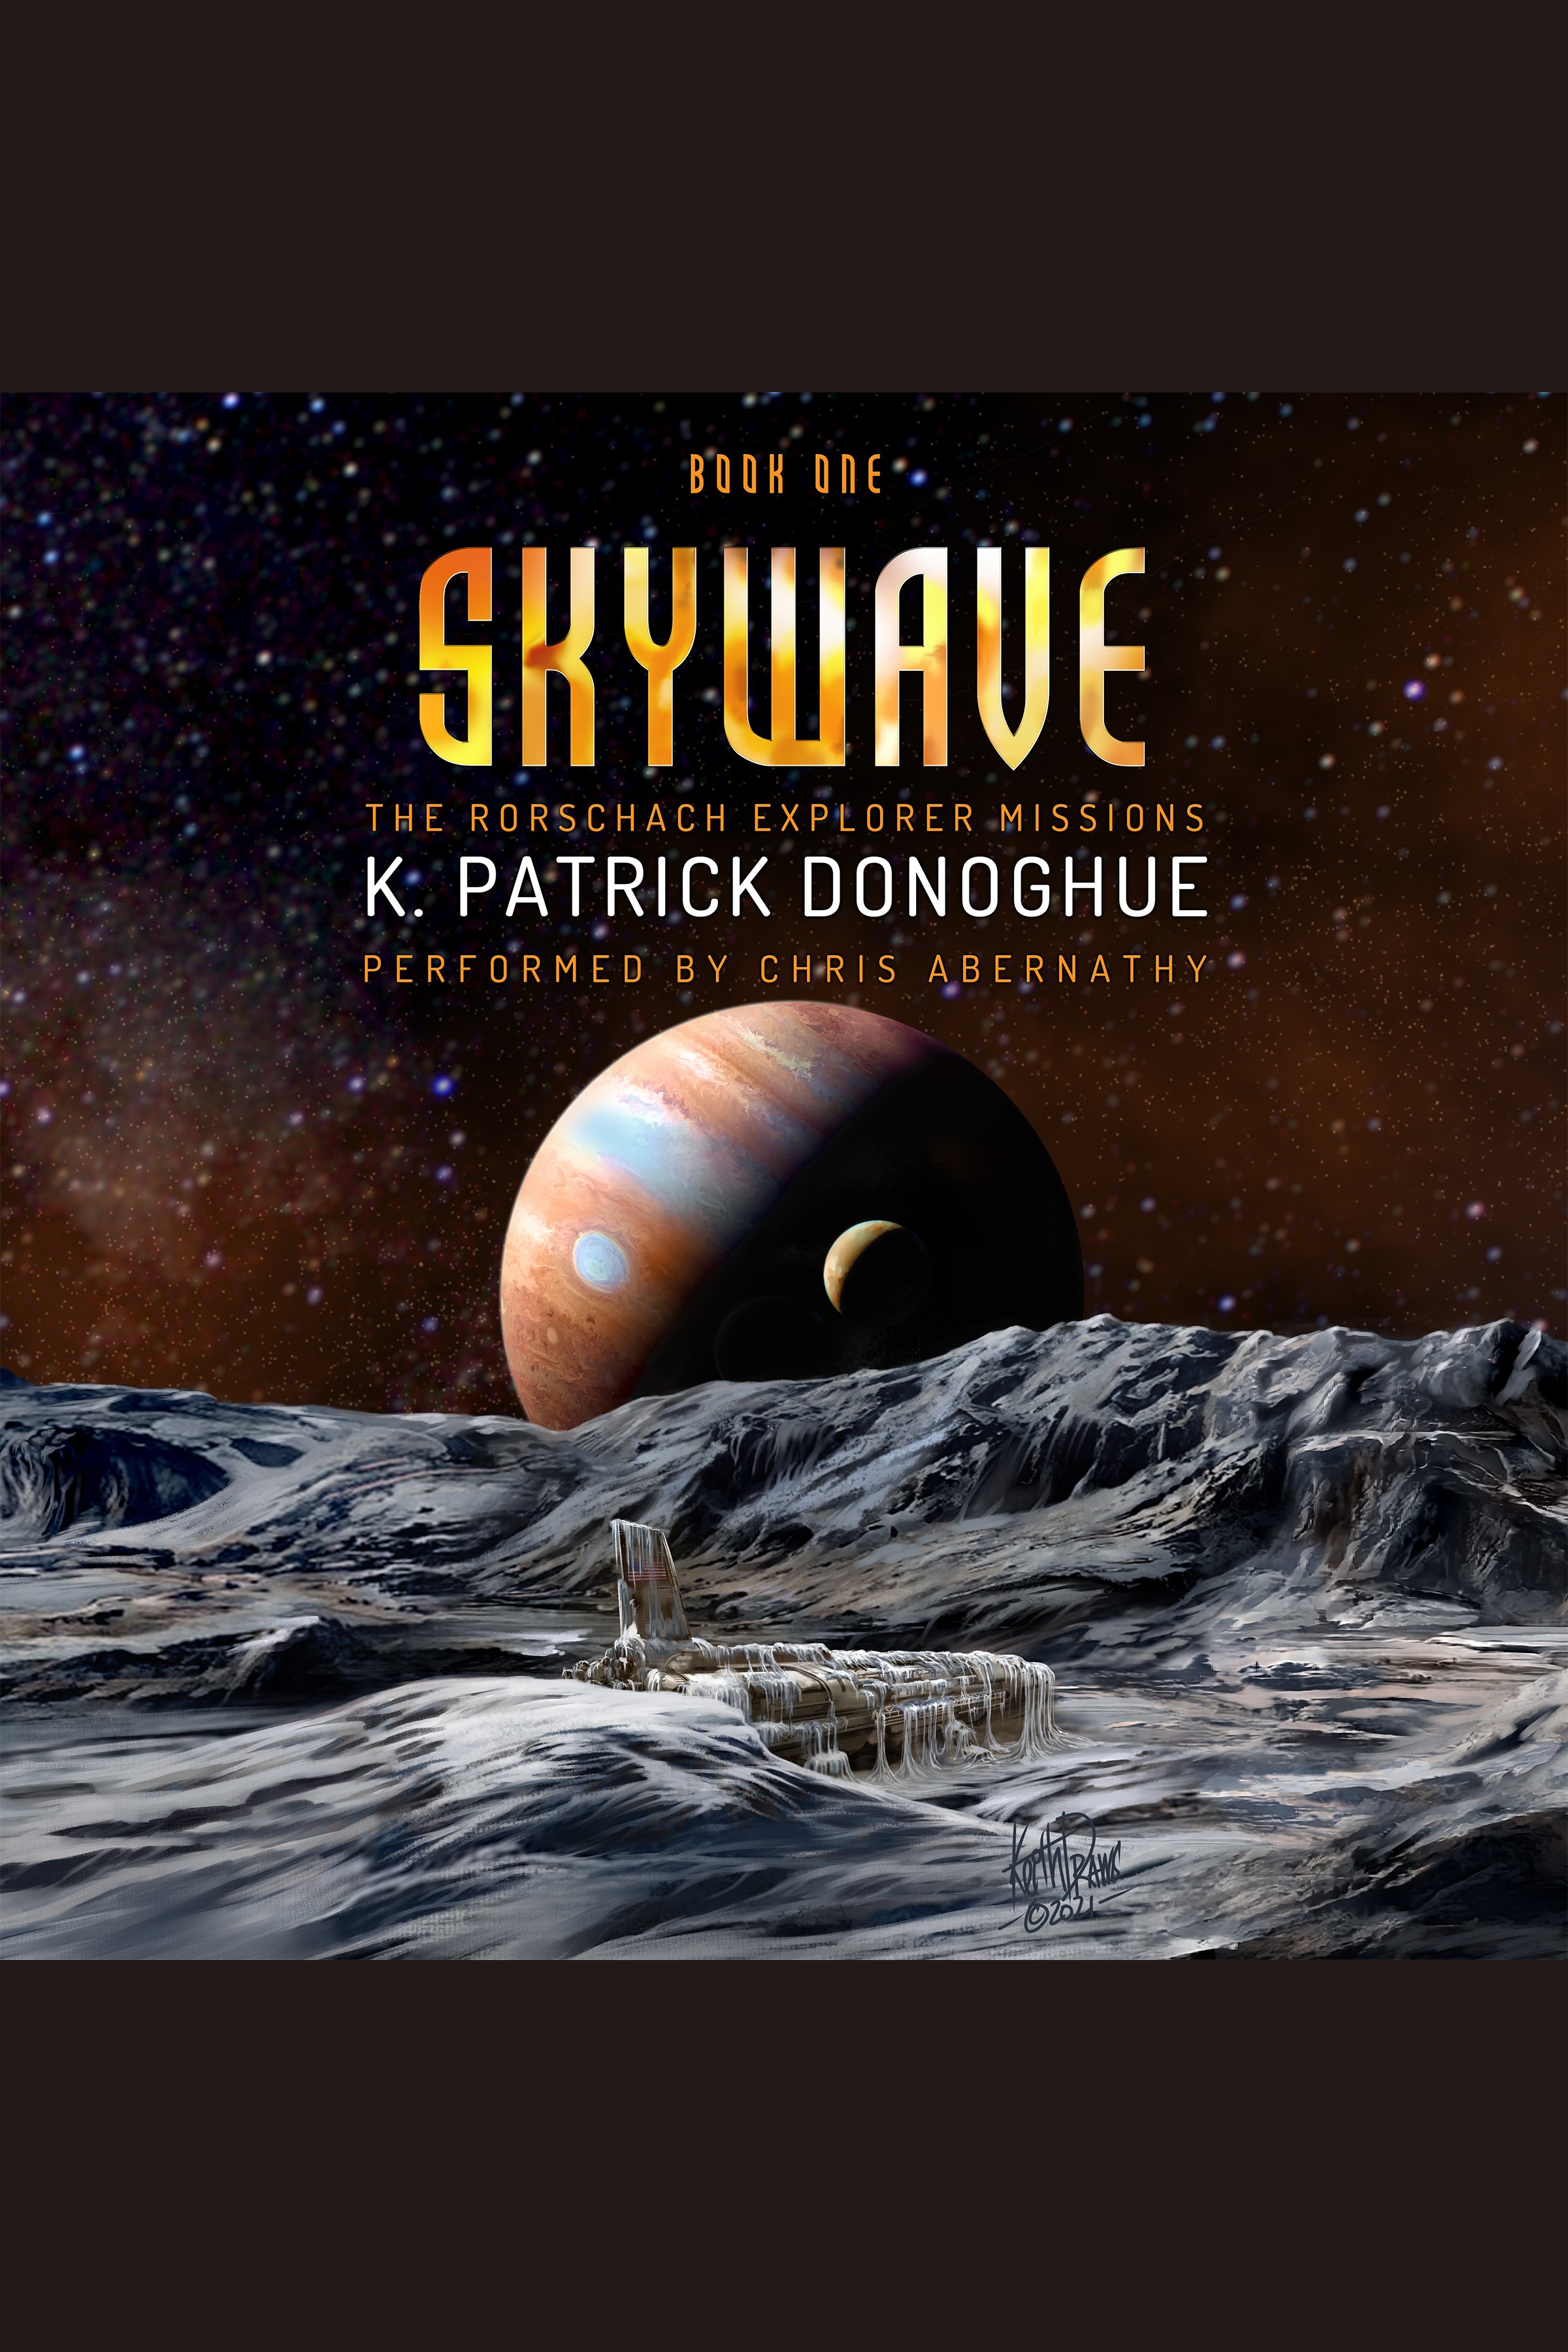 Skywave (The Rorschach Explorer Missions Book 1) by K